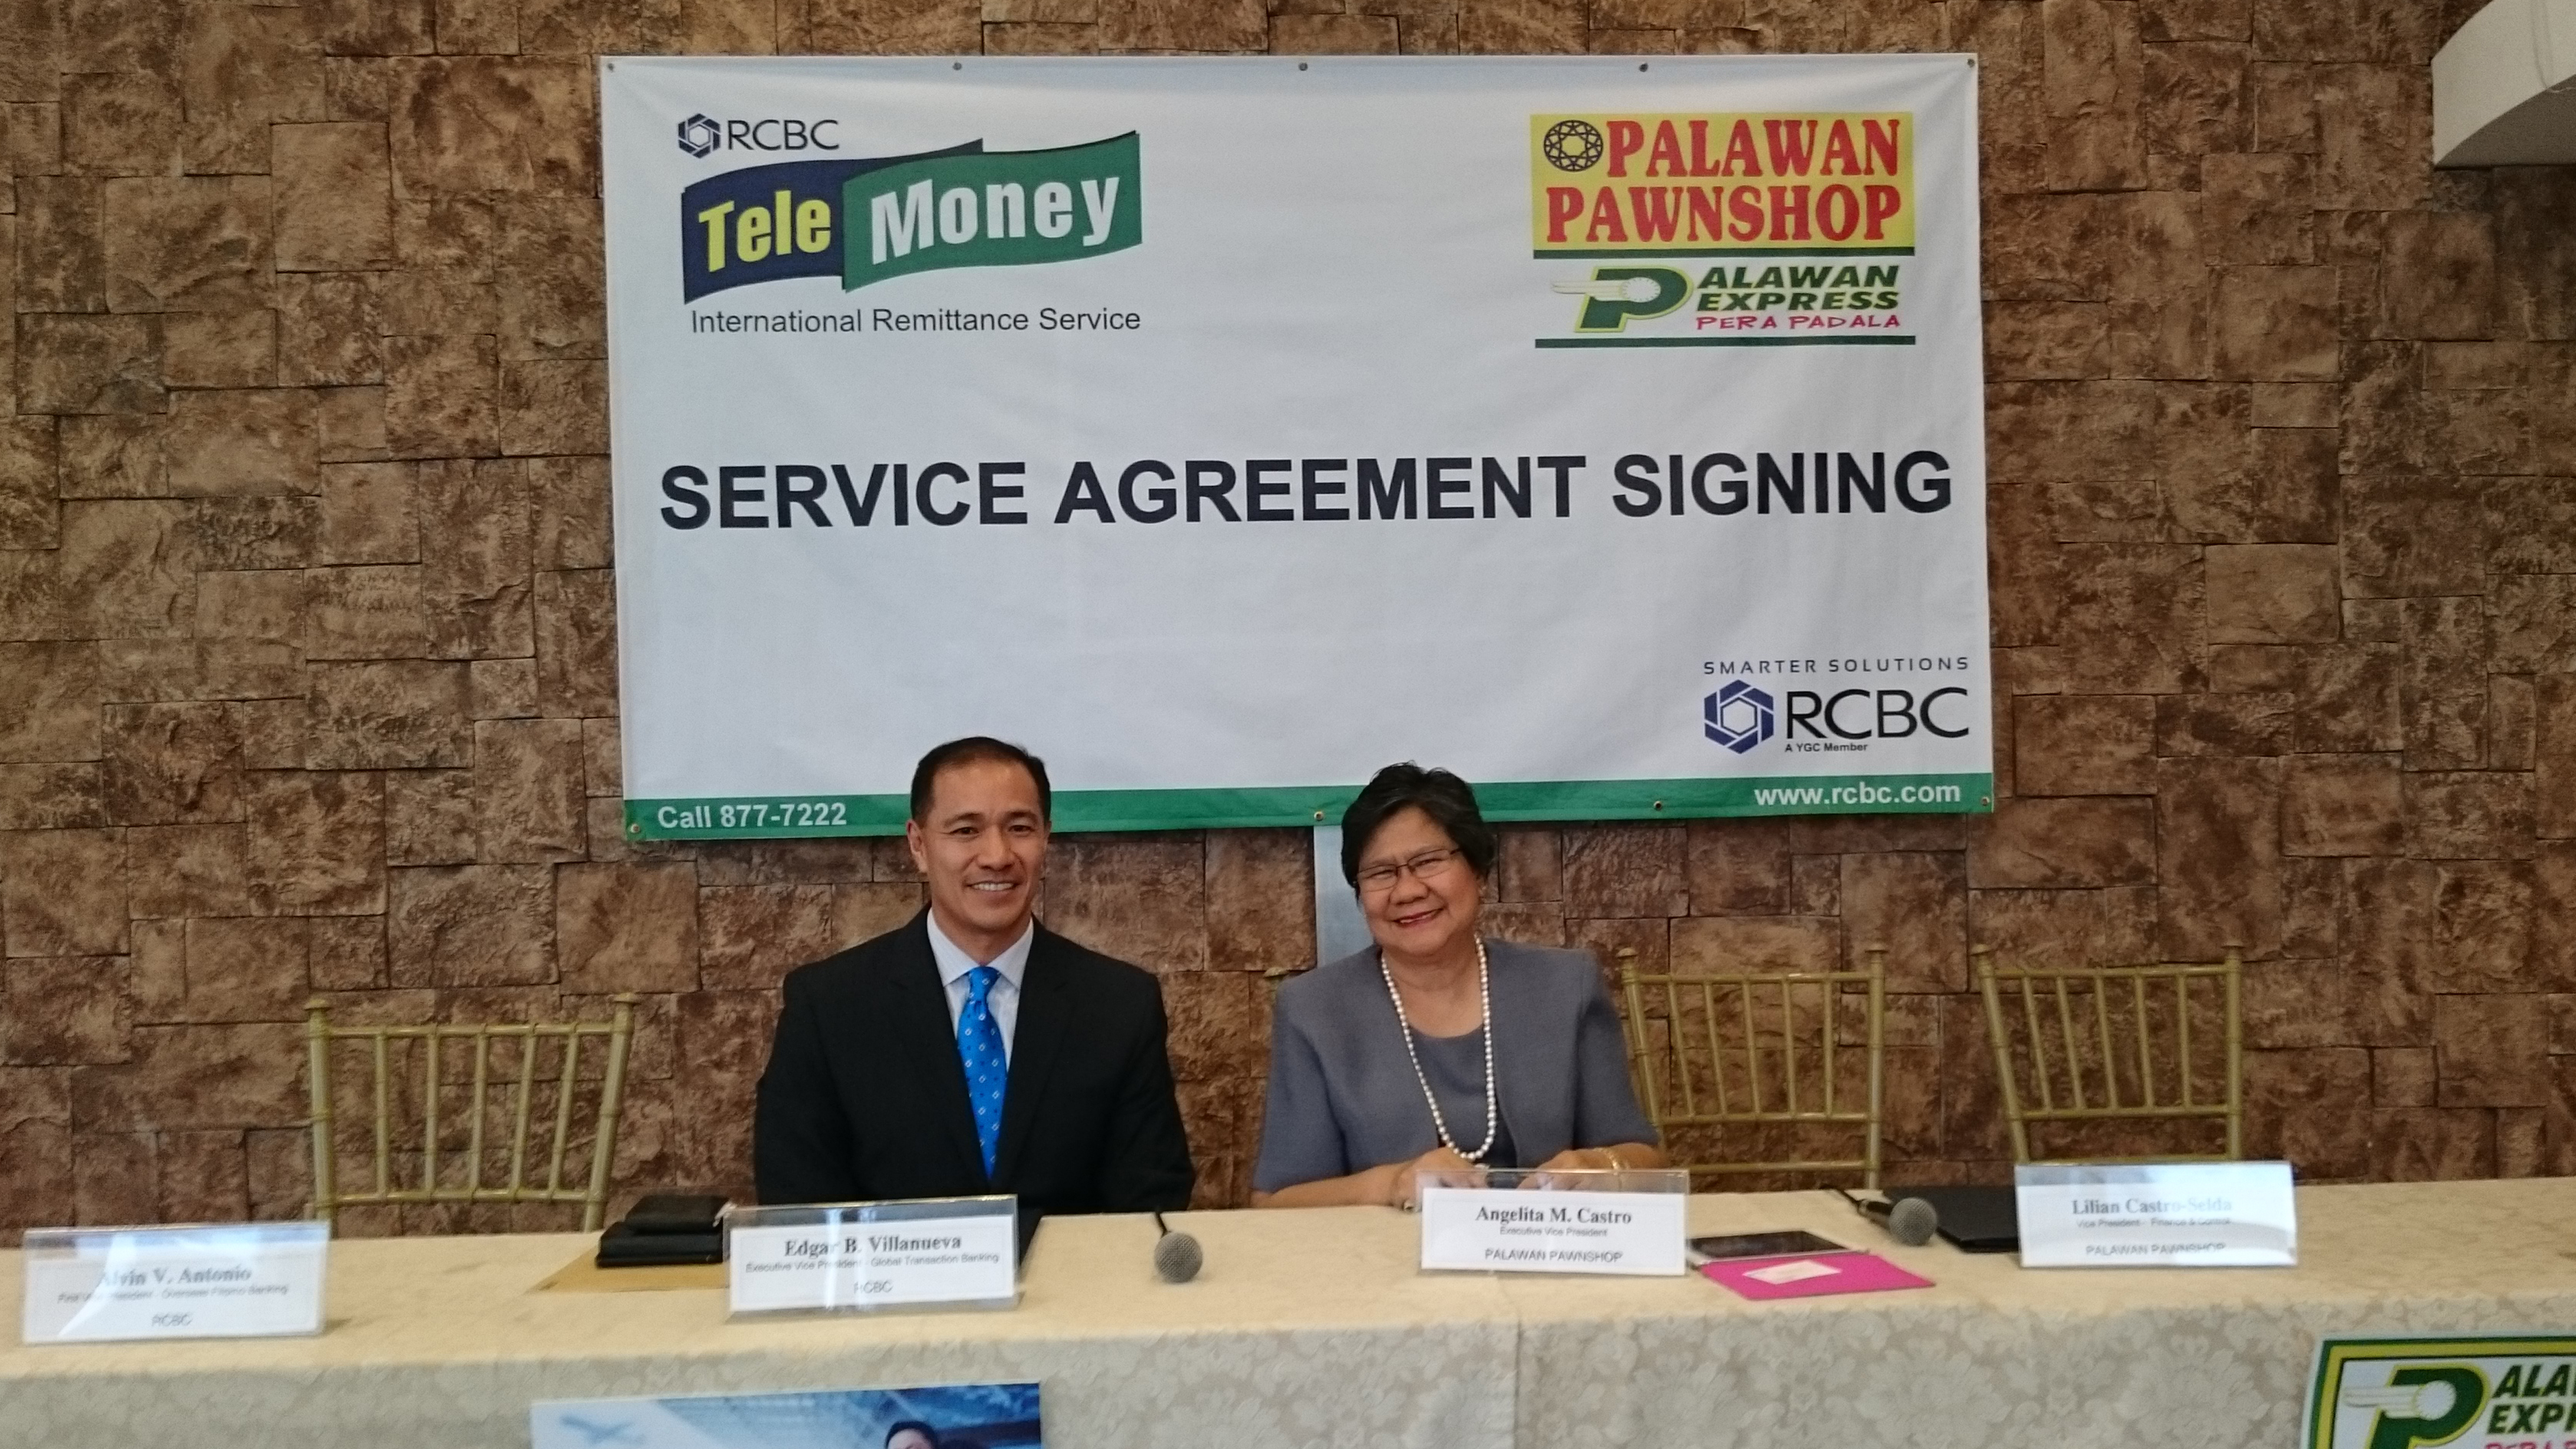 PARTNERSHIP. Edgar B. Villanueva, RCBC executive vice-president and Angelita M. Castro, Palawan Pawnshop executive vice-president sign an agreement to widen options of cash pick-up for Overseas Filipino Worker (OFW) beneficiaries in the country. Photo by Chris Schnabel / Rappler 